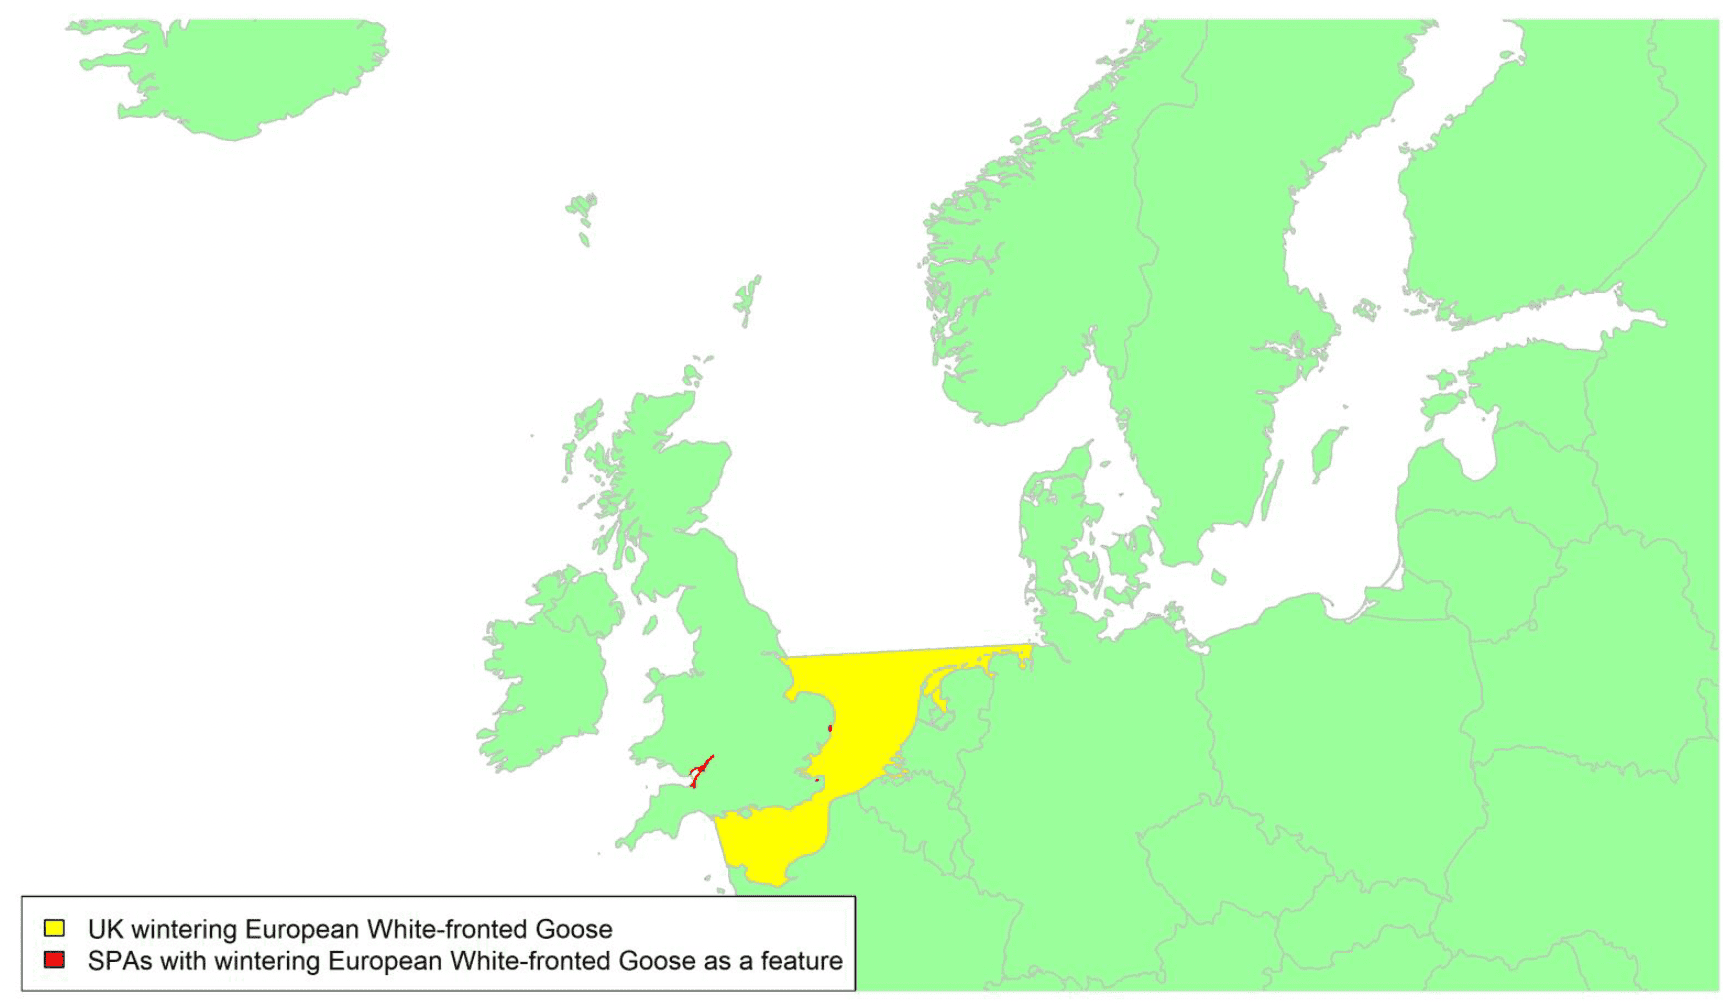 Map of North West Europe showing migratory routes and SPAs within the UK for European White-fronted Geese as described in the text below.